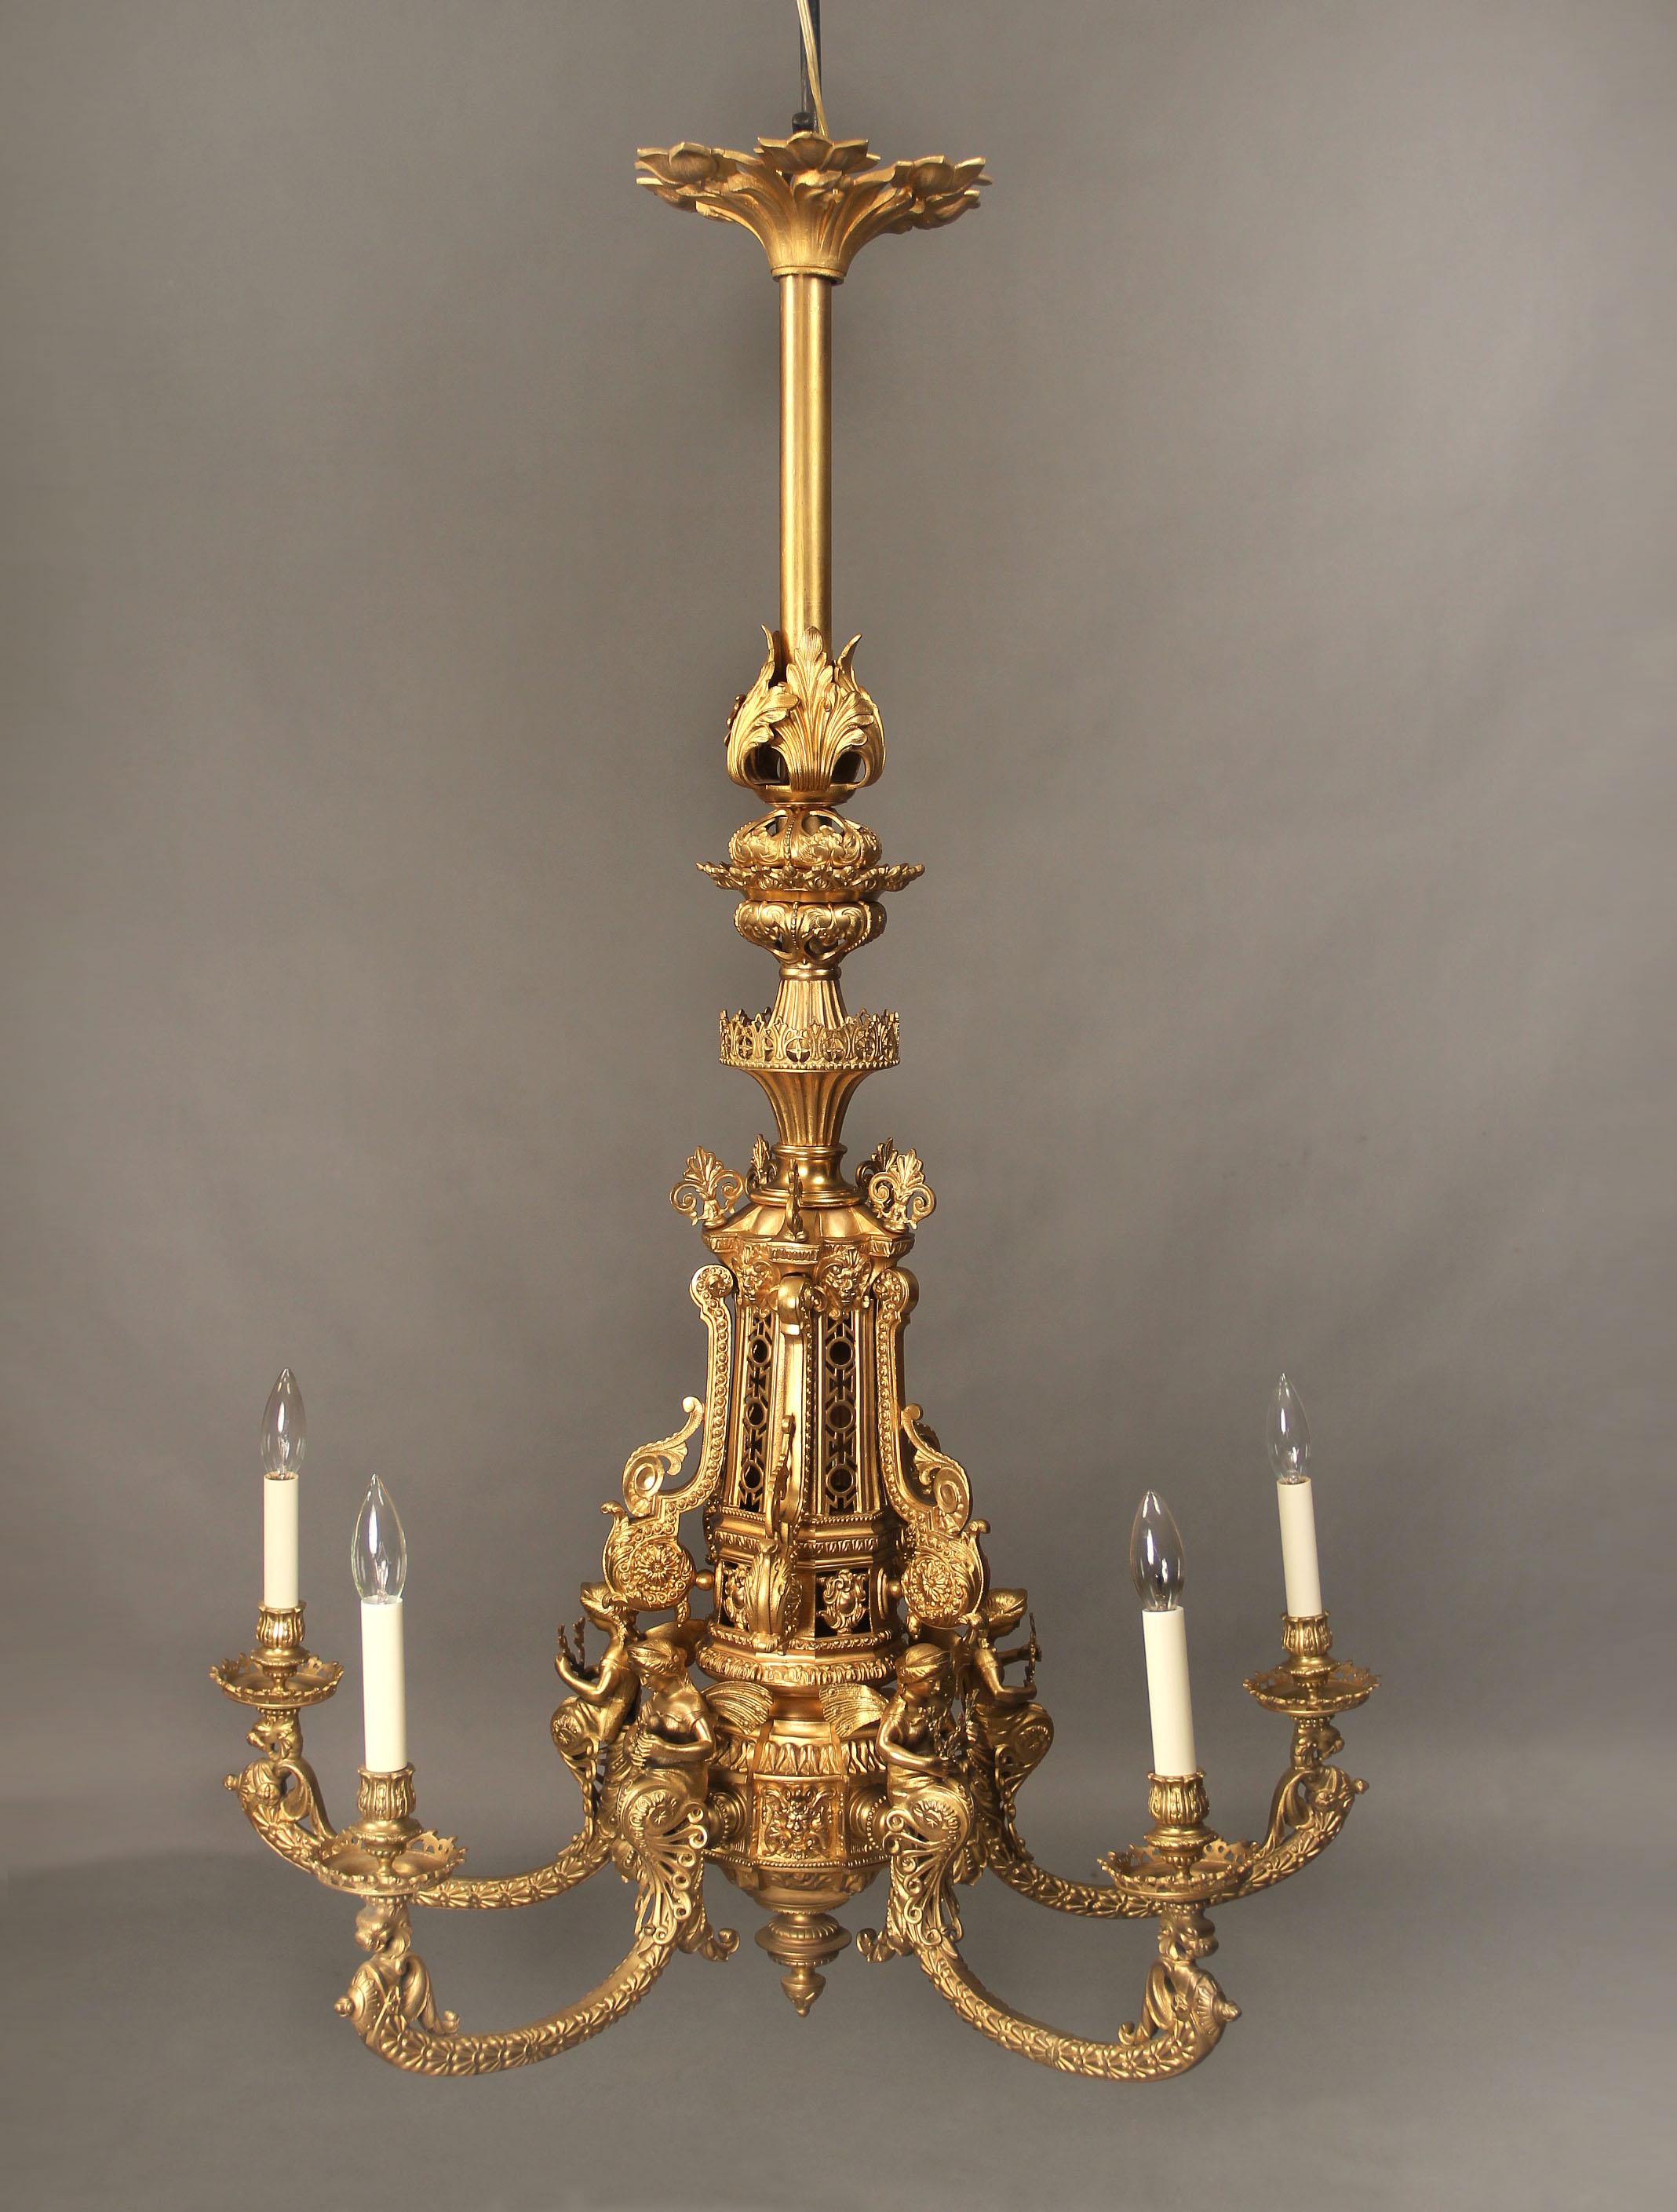 A late 19th century gilt bronze five-light chandelier

Heavy bronze casted, decorated with beautiful female nymphs. Each arm ending with dragons, the body with lion masks.

 